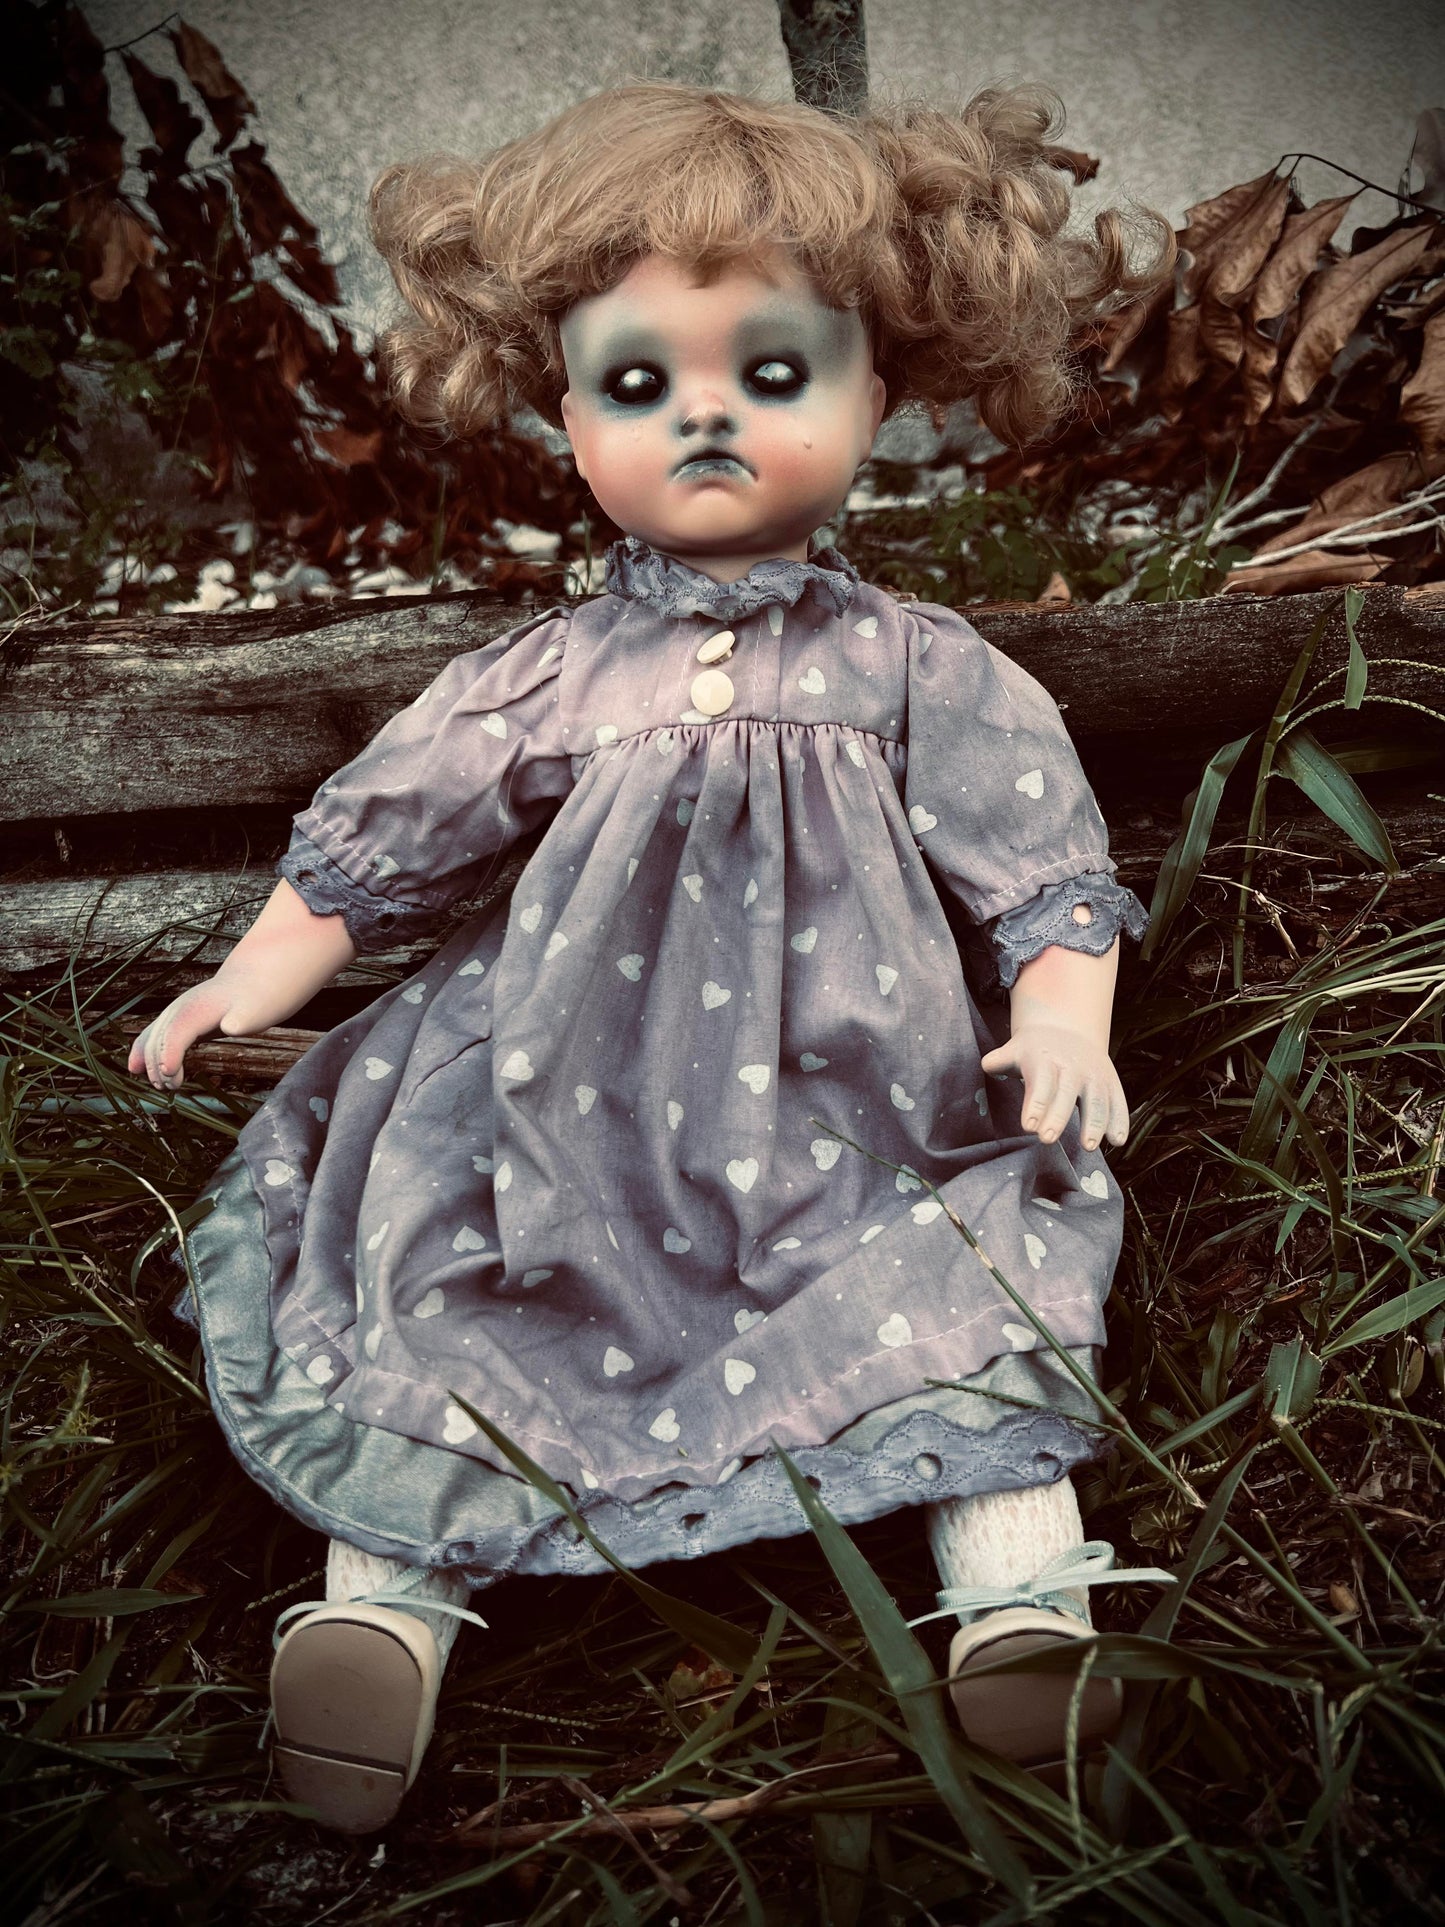 Meet Laurel 18" Doll Porcelain Witchy Creepy Haunted Spirit Infected Scary Spooky Zombie Possessed Fall Gothic Positive Energy